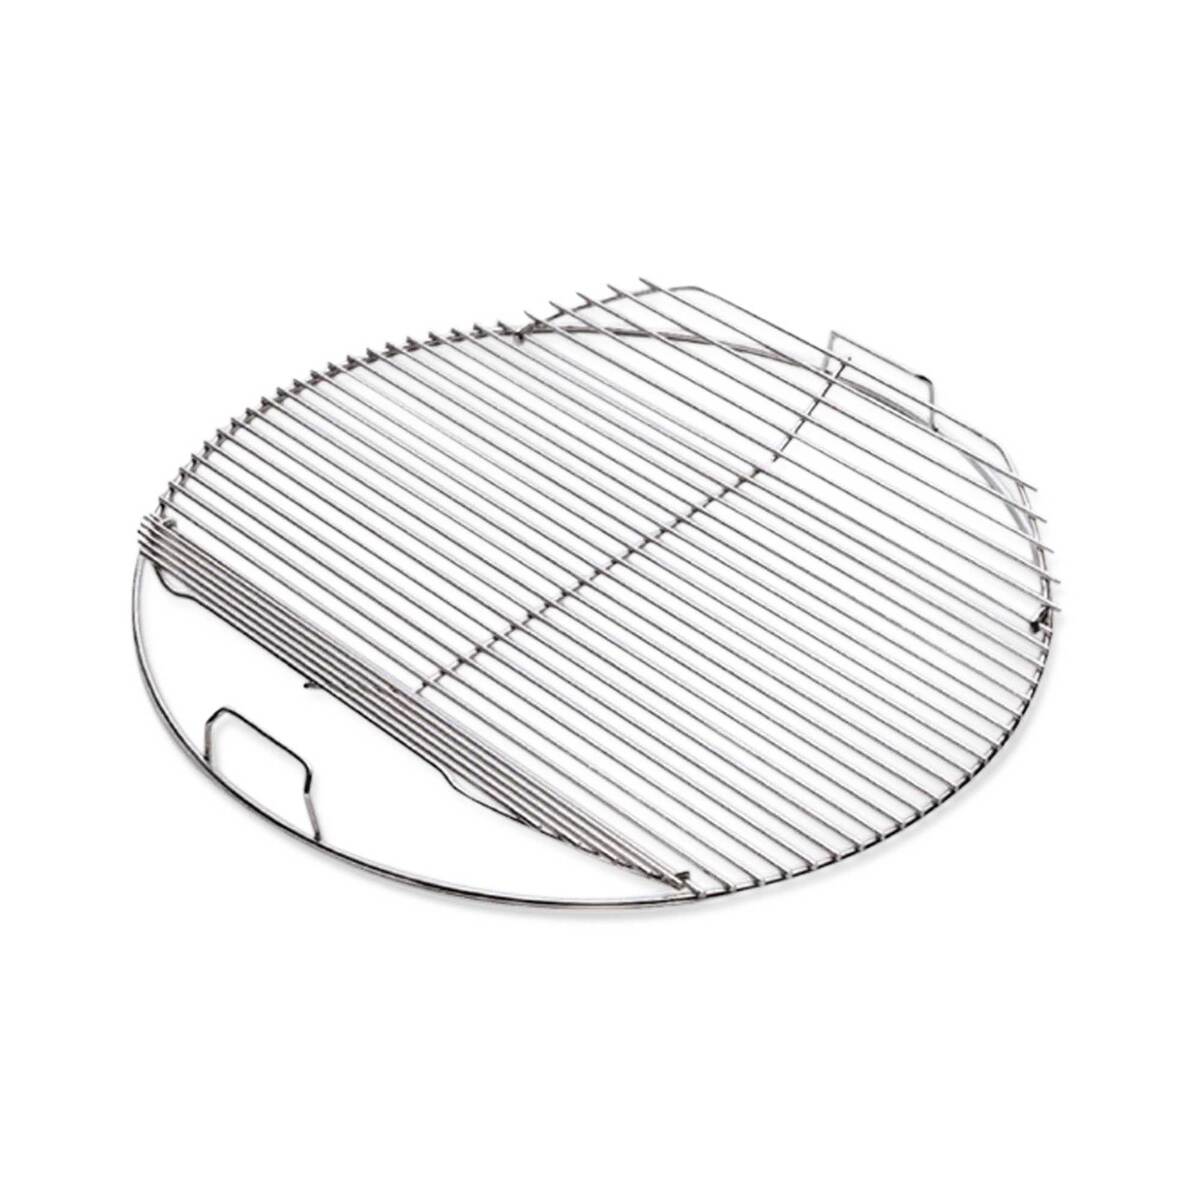 Weber Hinged Cooking Grate Built for 47cm Charcoal Barbecues 8414